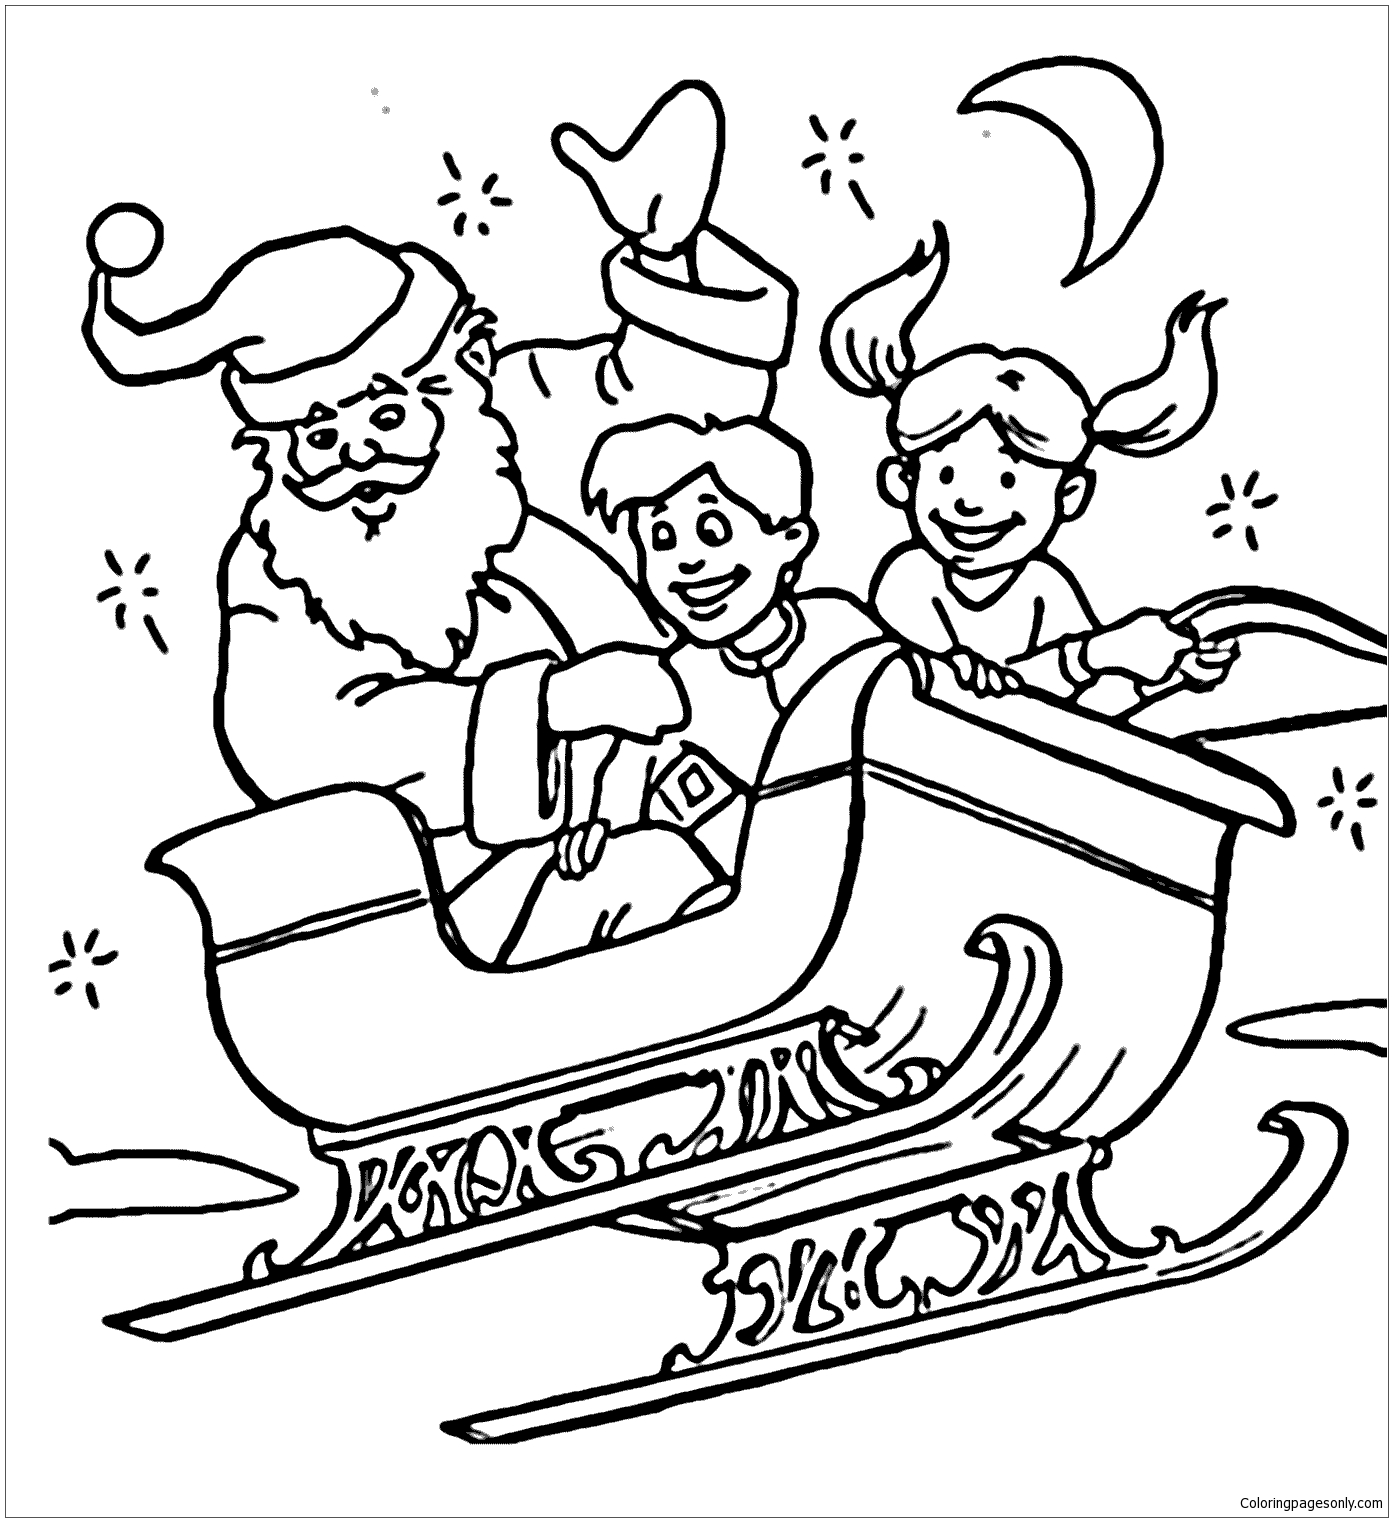 Santa Claus And Children Flying in Sleigh Coloring Pages - Santa Claus